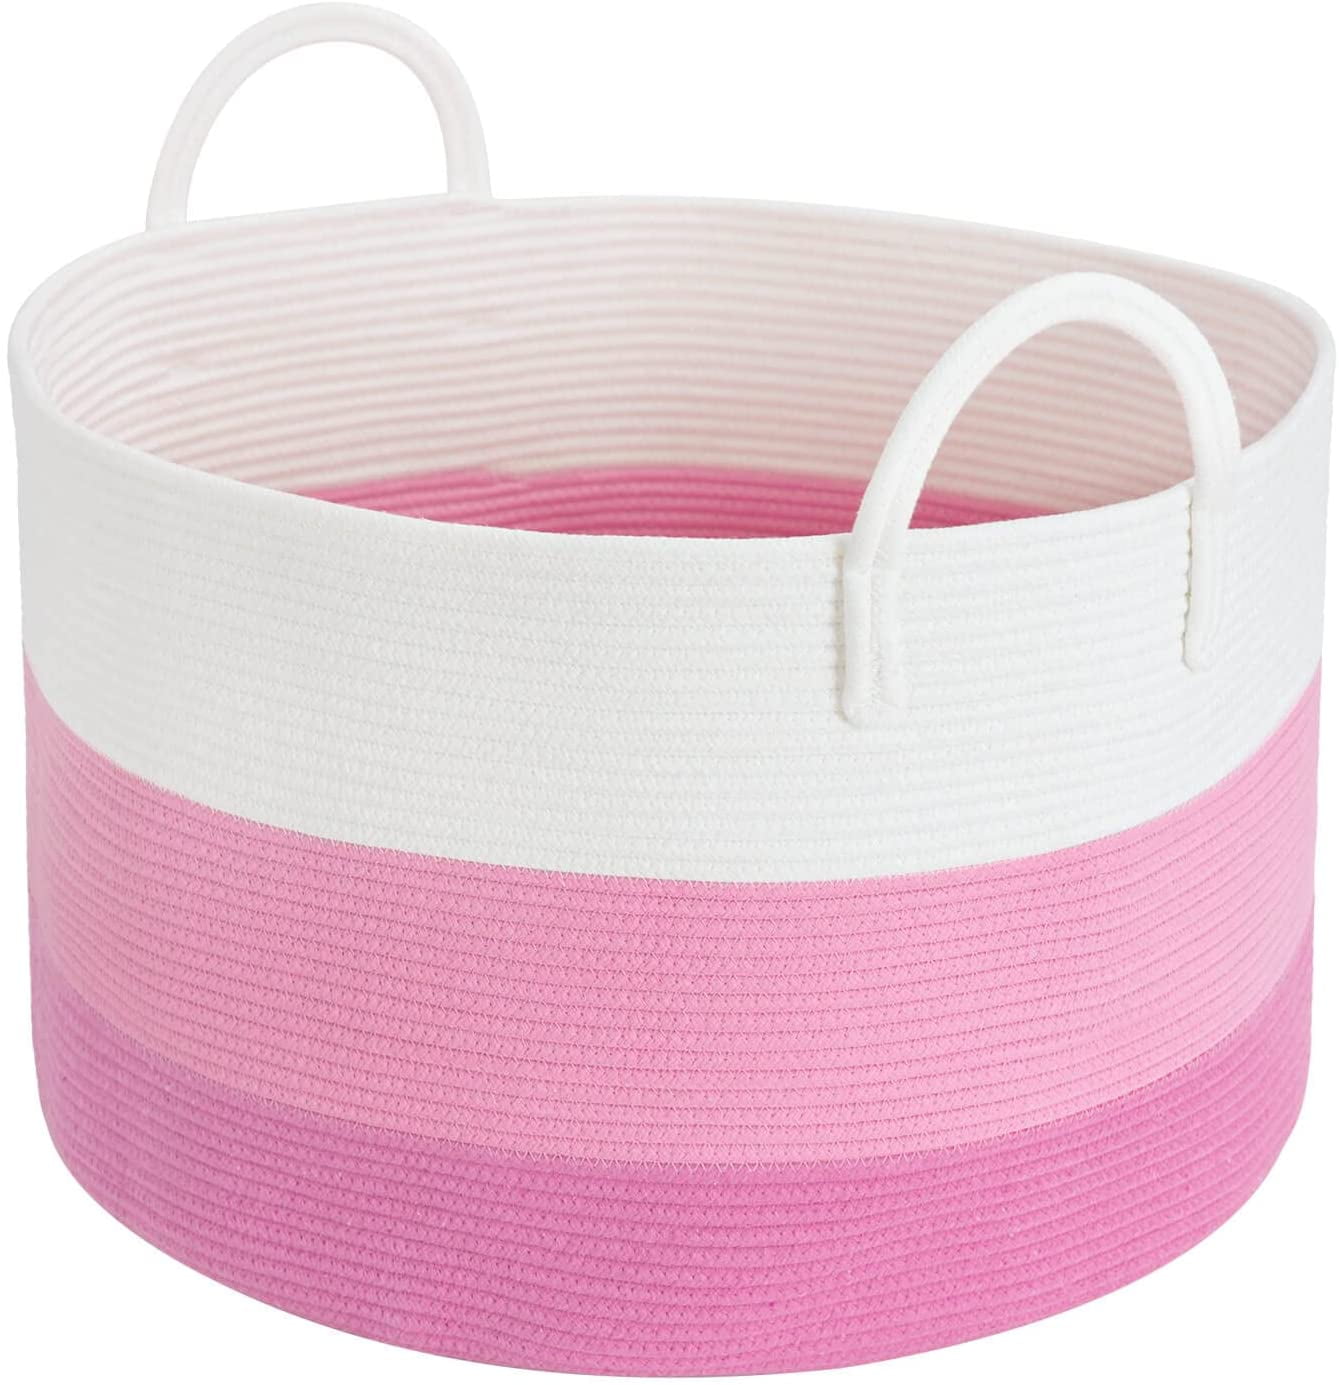 Farmlyn Creek Cotton Woven Baskets for Storage, Pink Organizers (3 Sizes, 3 Pack)